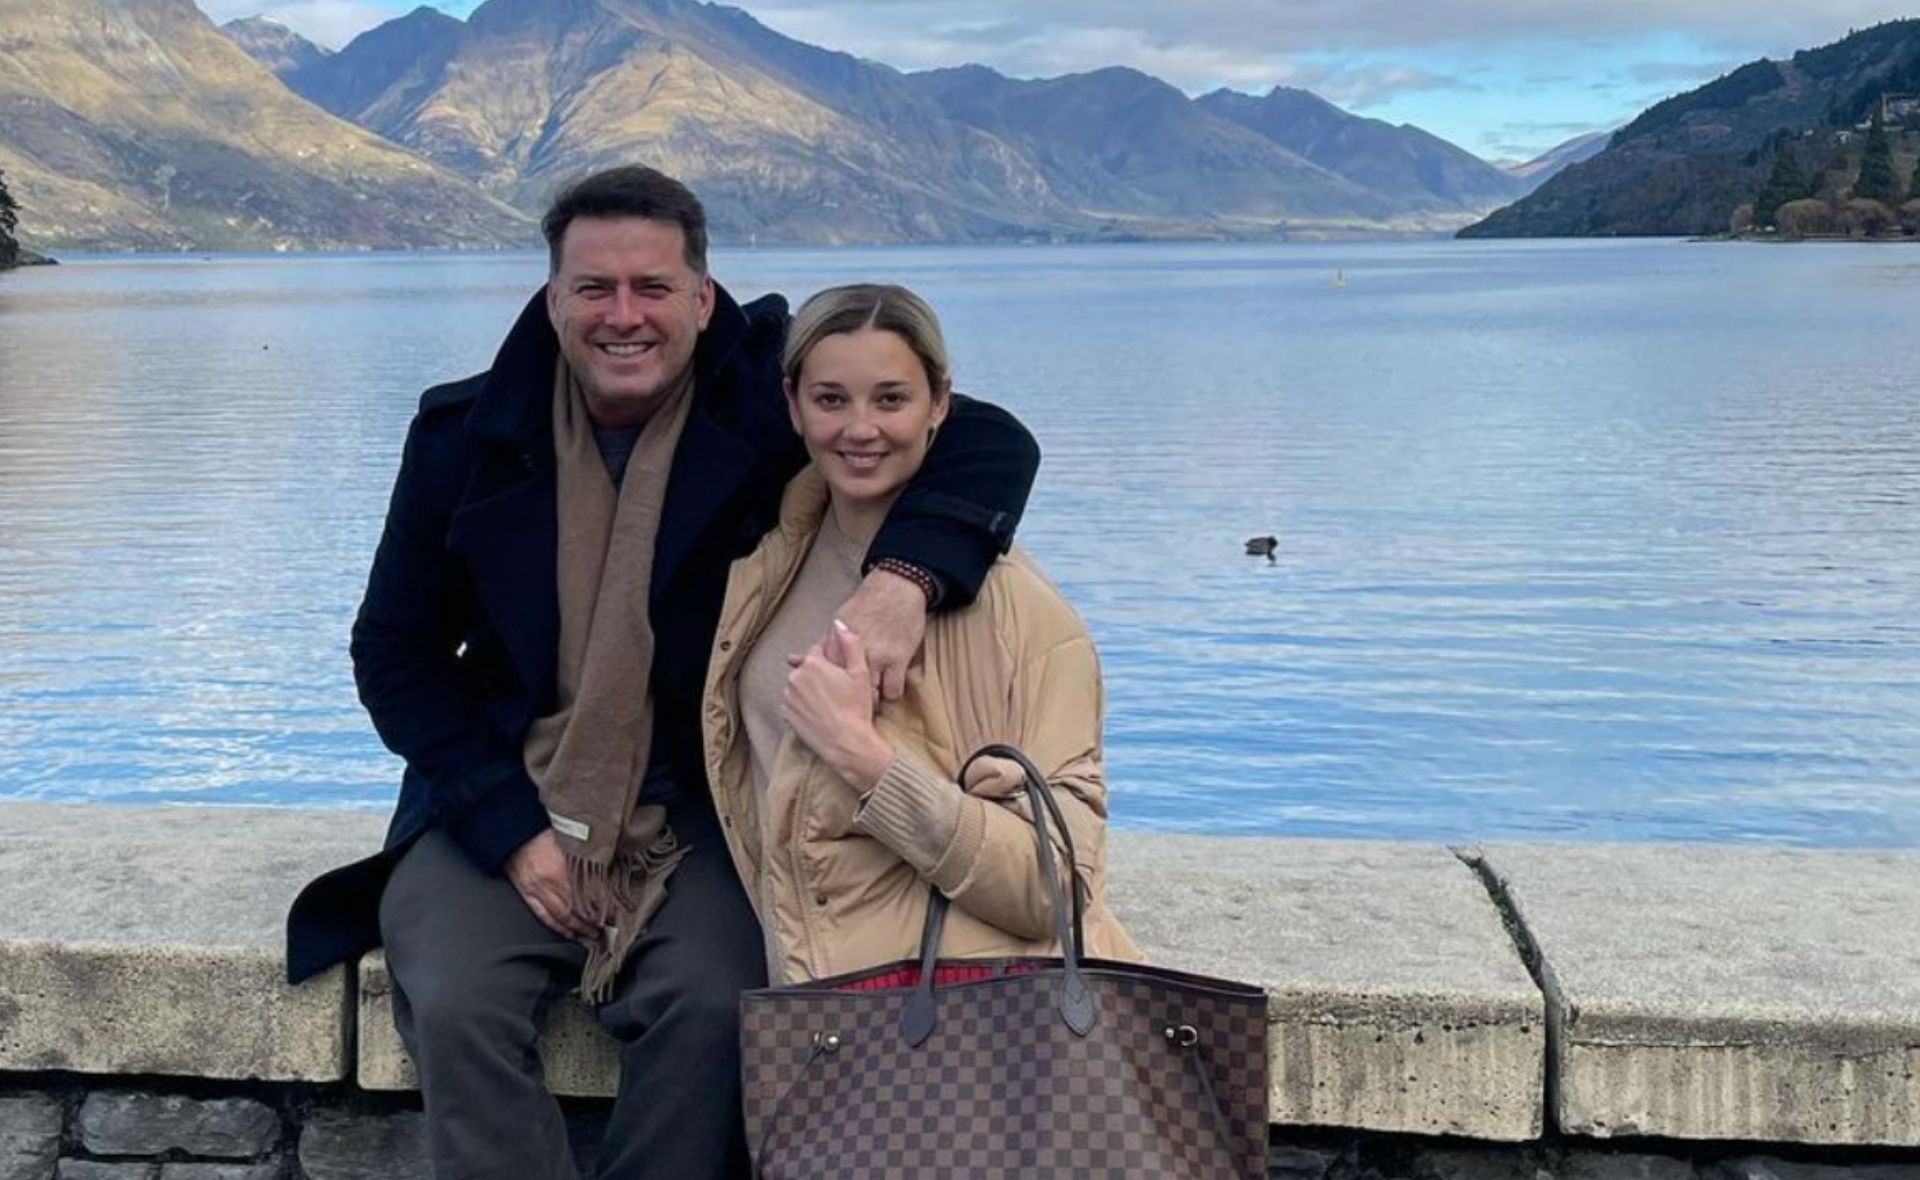 Jasmine and Karl Stefanovic shared a beautiful, quiet moment with their daughter just before Sydney’s lockdown began